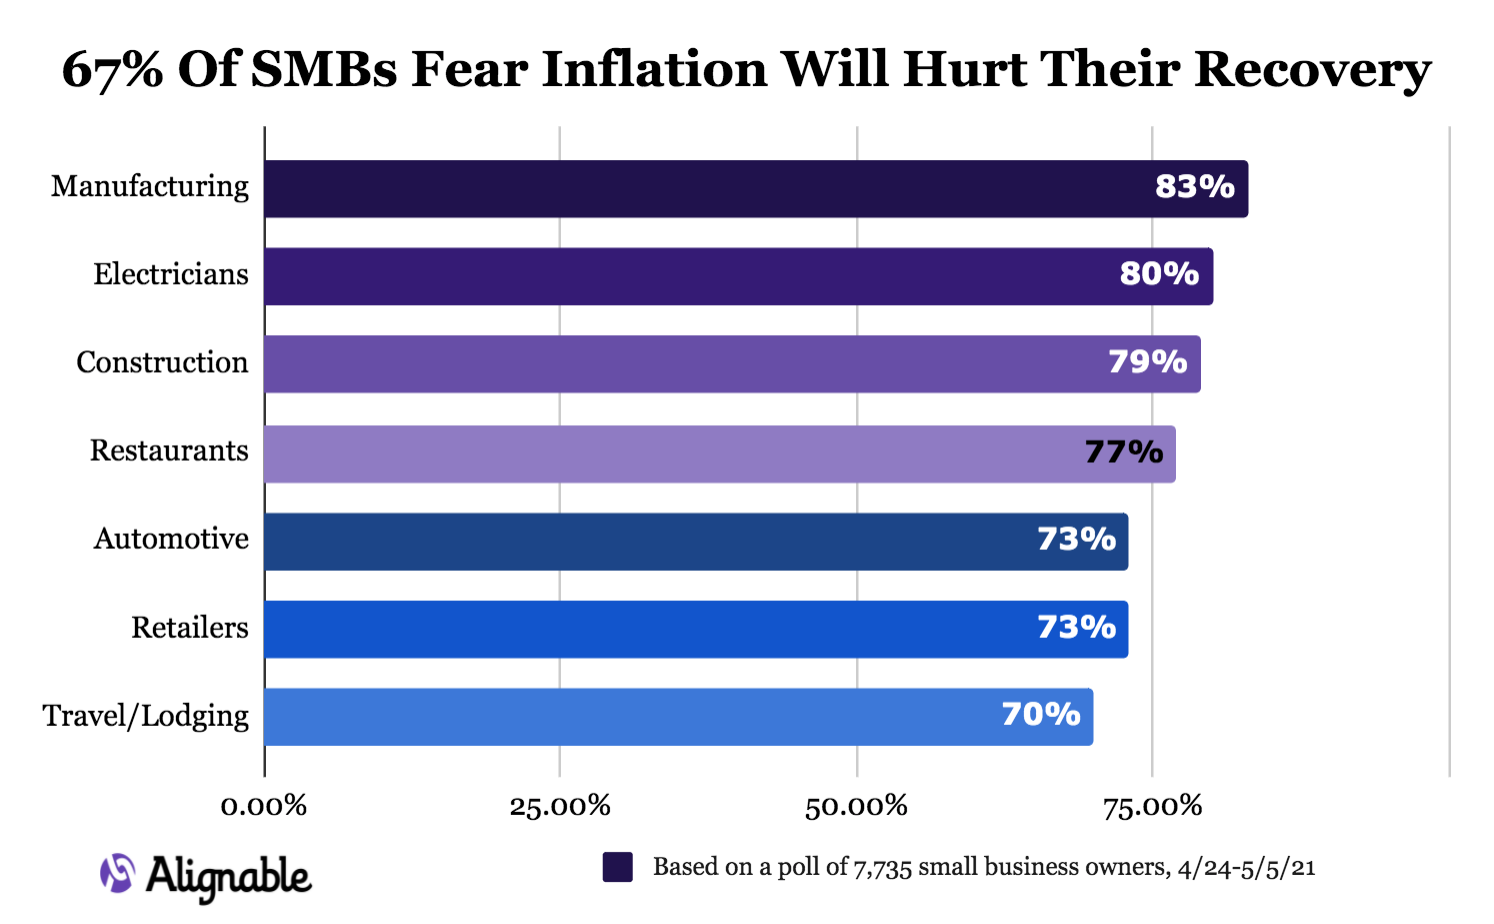 Alignable: 67% of SMBs Fear Inflation Will Hurt Their Recovery